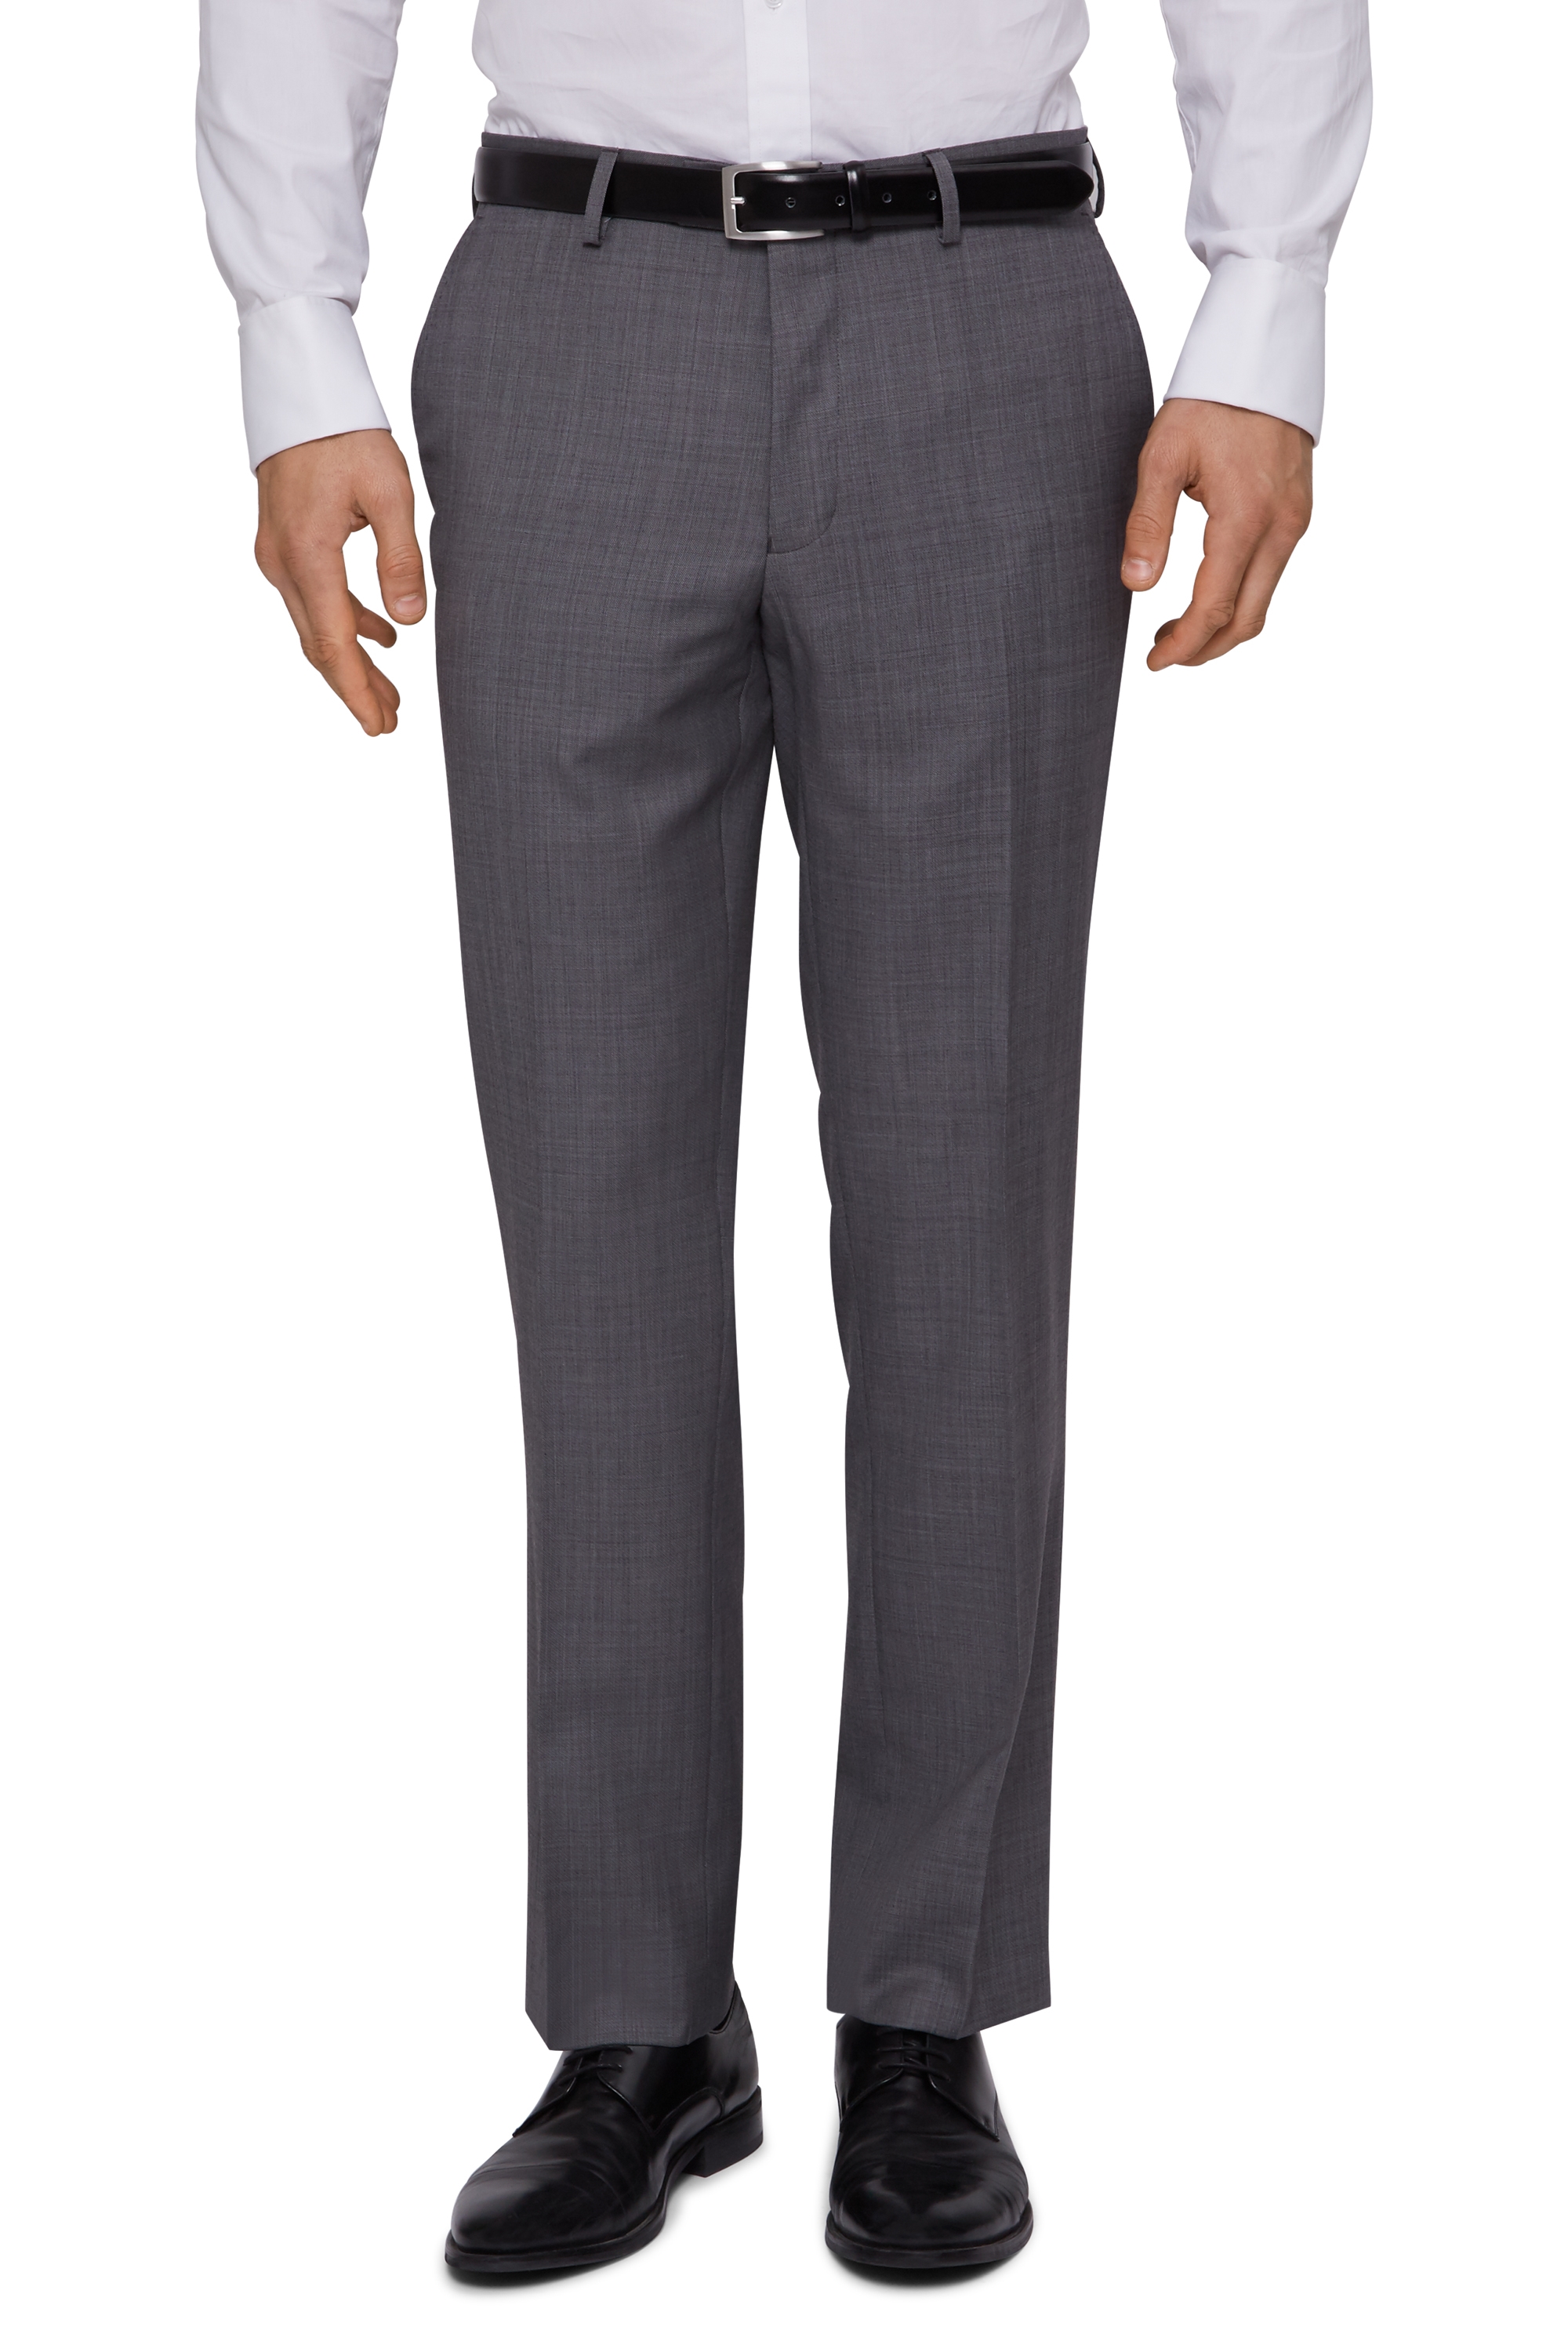 Ted Baker Tailored Fit Silver Sharkskin Trouser | Buy Online at Moss